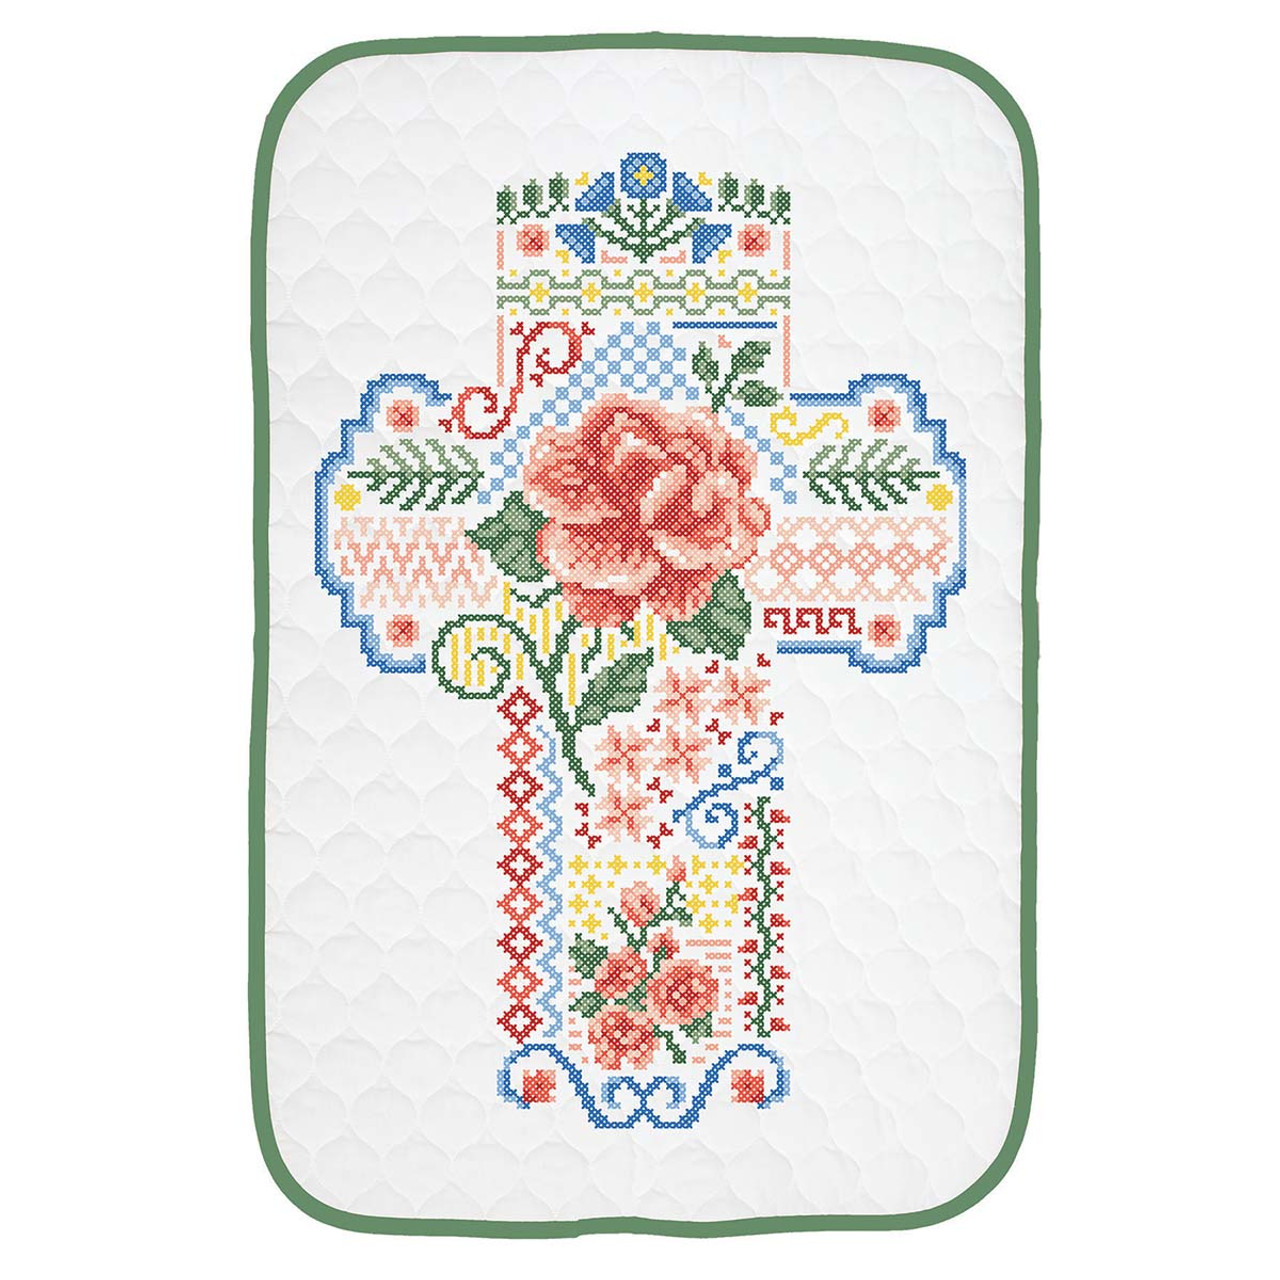 Herrschners Spring Bouquet Kit & Frame Stamped Embroidery